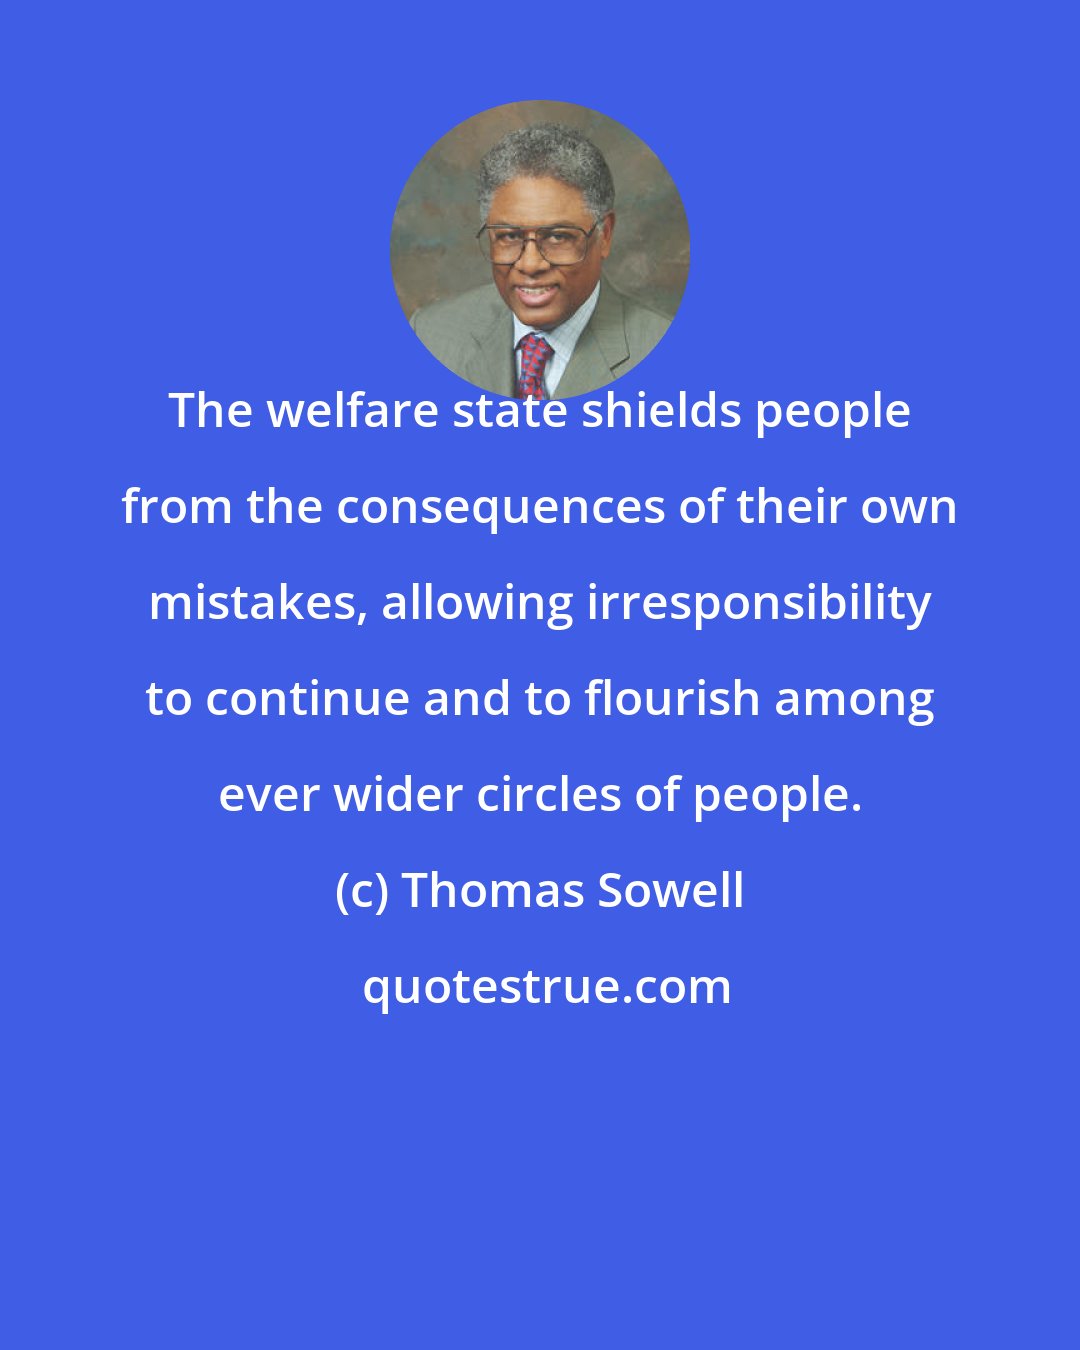 Thomas Sowell: The welfare state shields people from the consequences of their own mistakes, allowing irresponsibility to continue and to flourish among ever wider circles of people.